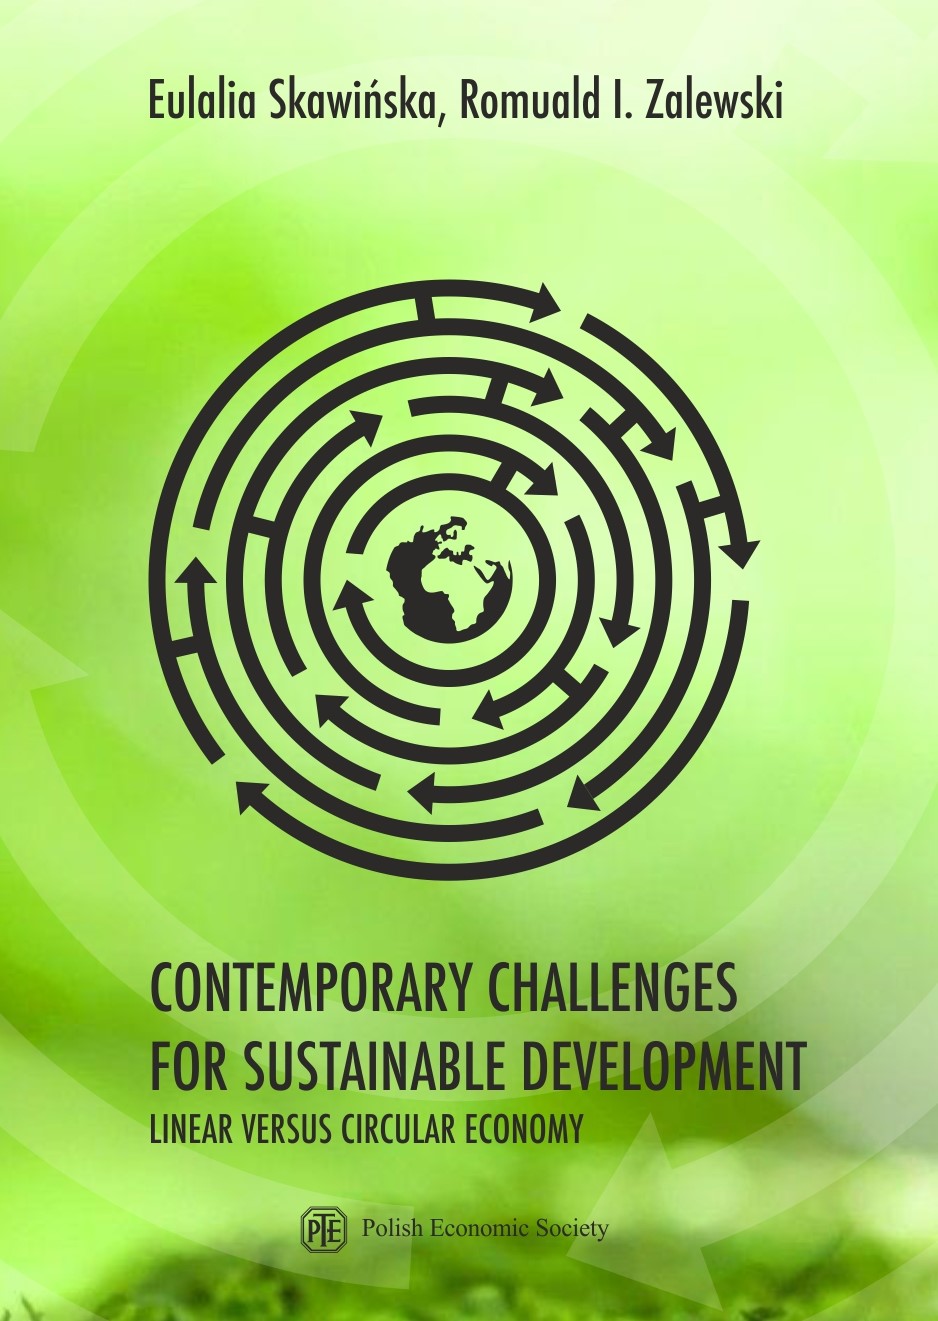 Contemporary challenges for sustainable development: linear versus circular economy